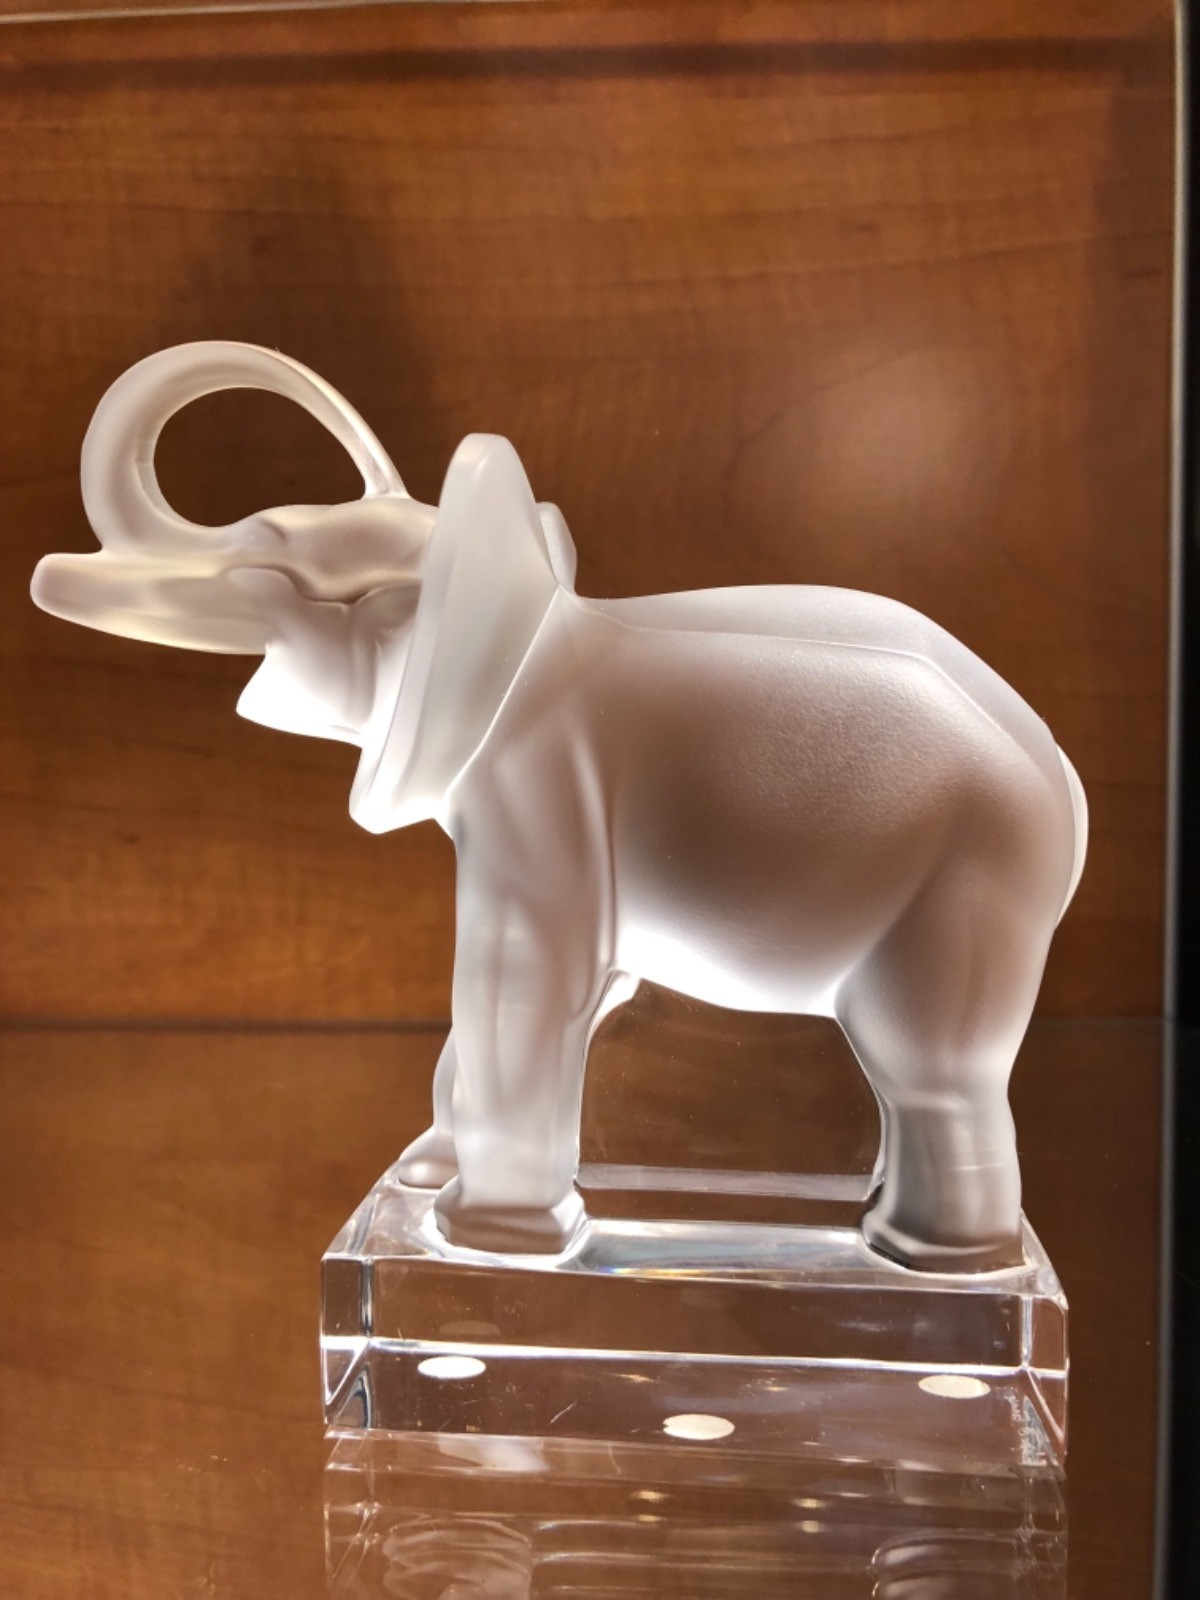 lalique elephant vase of lalique france clear frosted glass elephant paperweight designed throughout lalique france clear frosted glass elephant paperweight designed in 1931 1 of